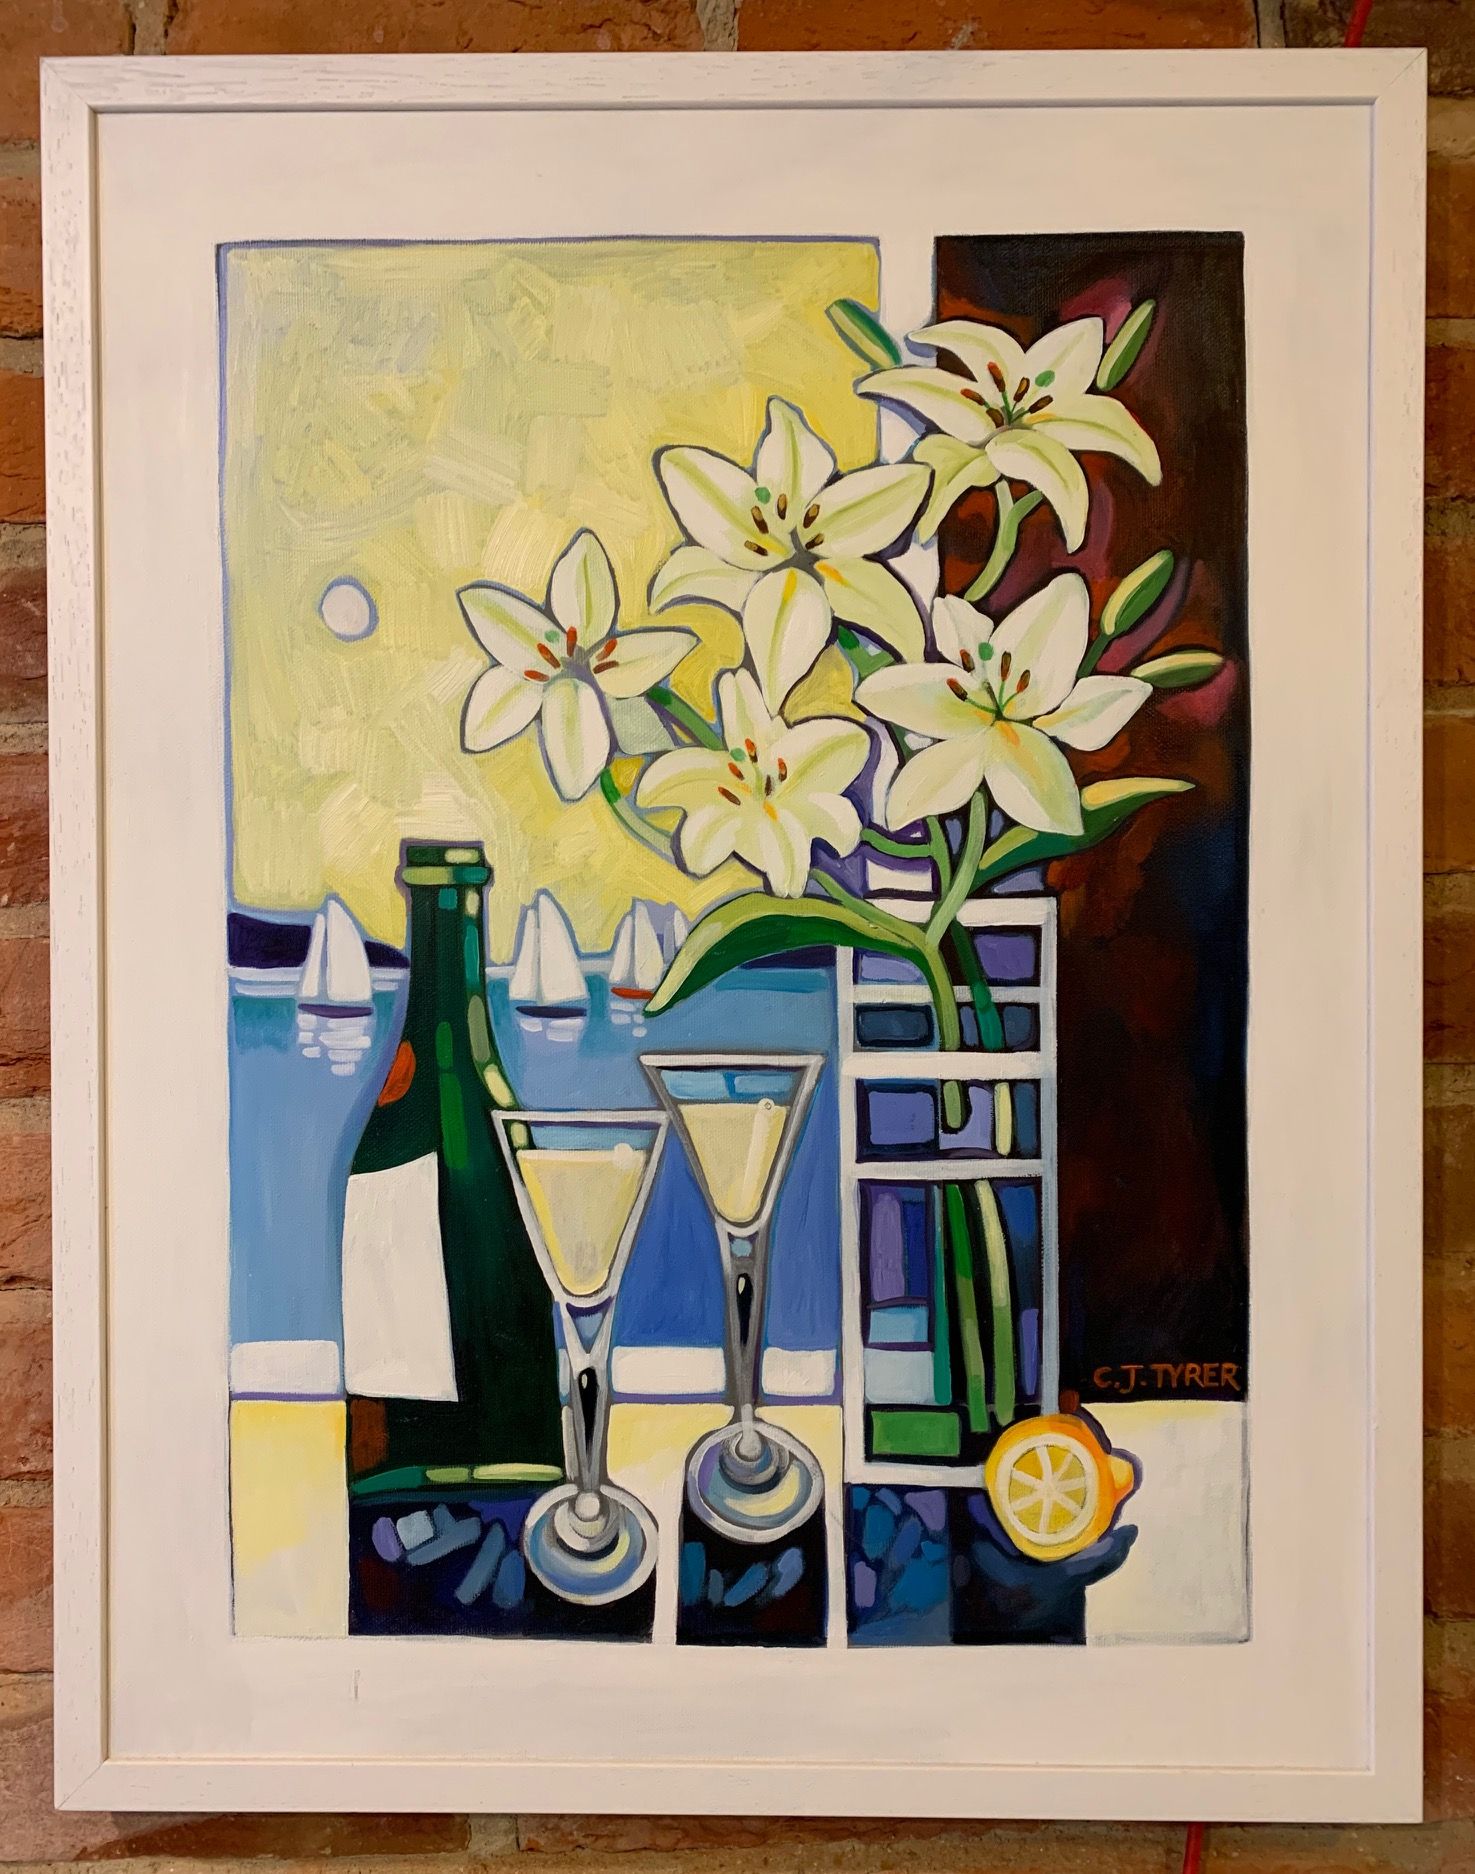 Champagne Afternoon by Carolyn Tryer